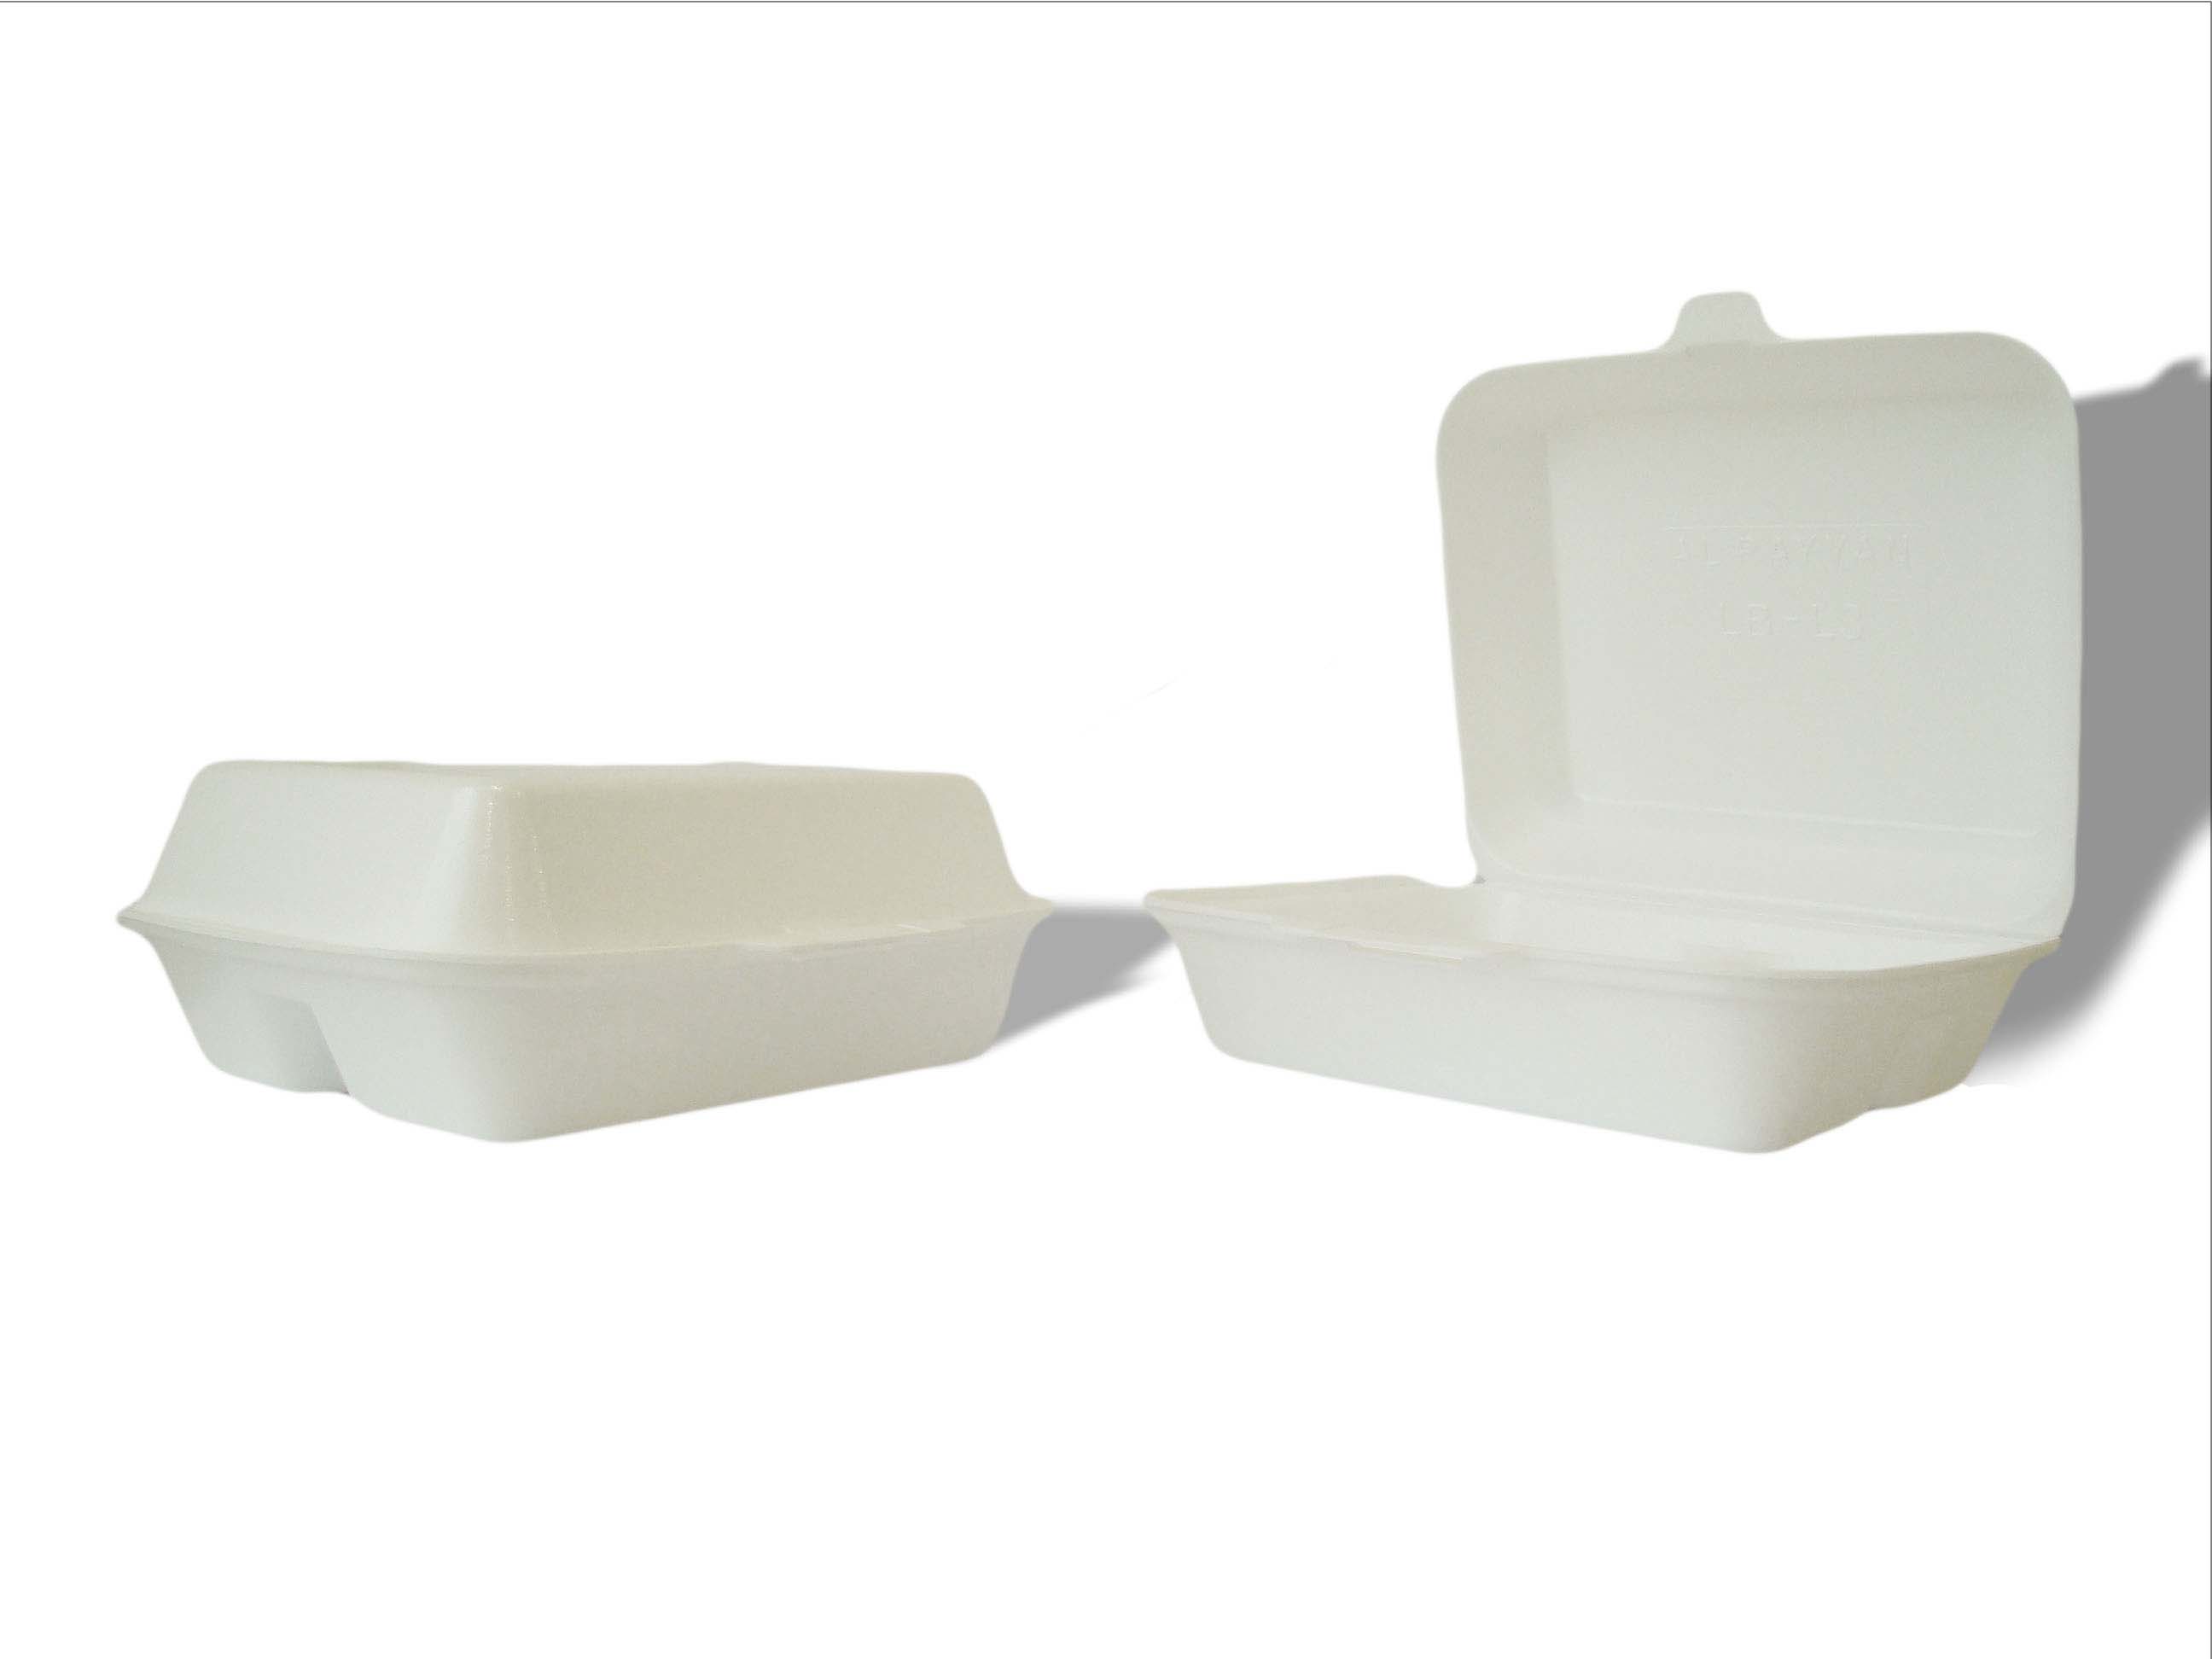 Foam Box LB4 – Industrial & Food Packaging Products